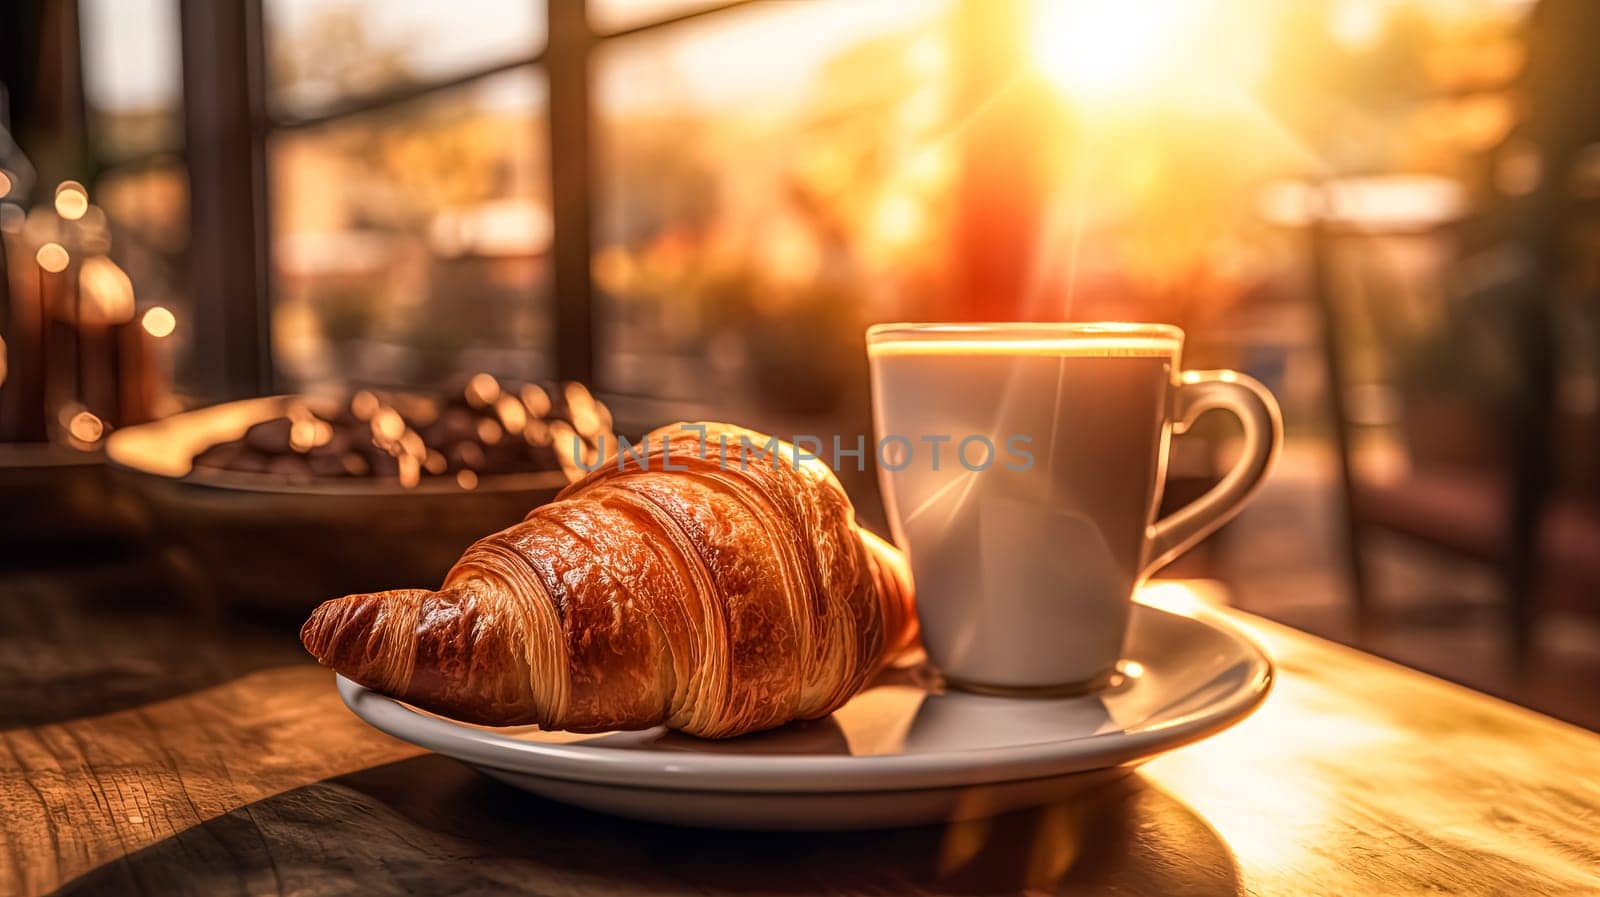 A white coffee cup sits on a white plate next to a croissant. The scene is set in a cafe, with the sun shining through the window. Concept of relaxation and enjoyment